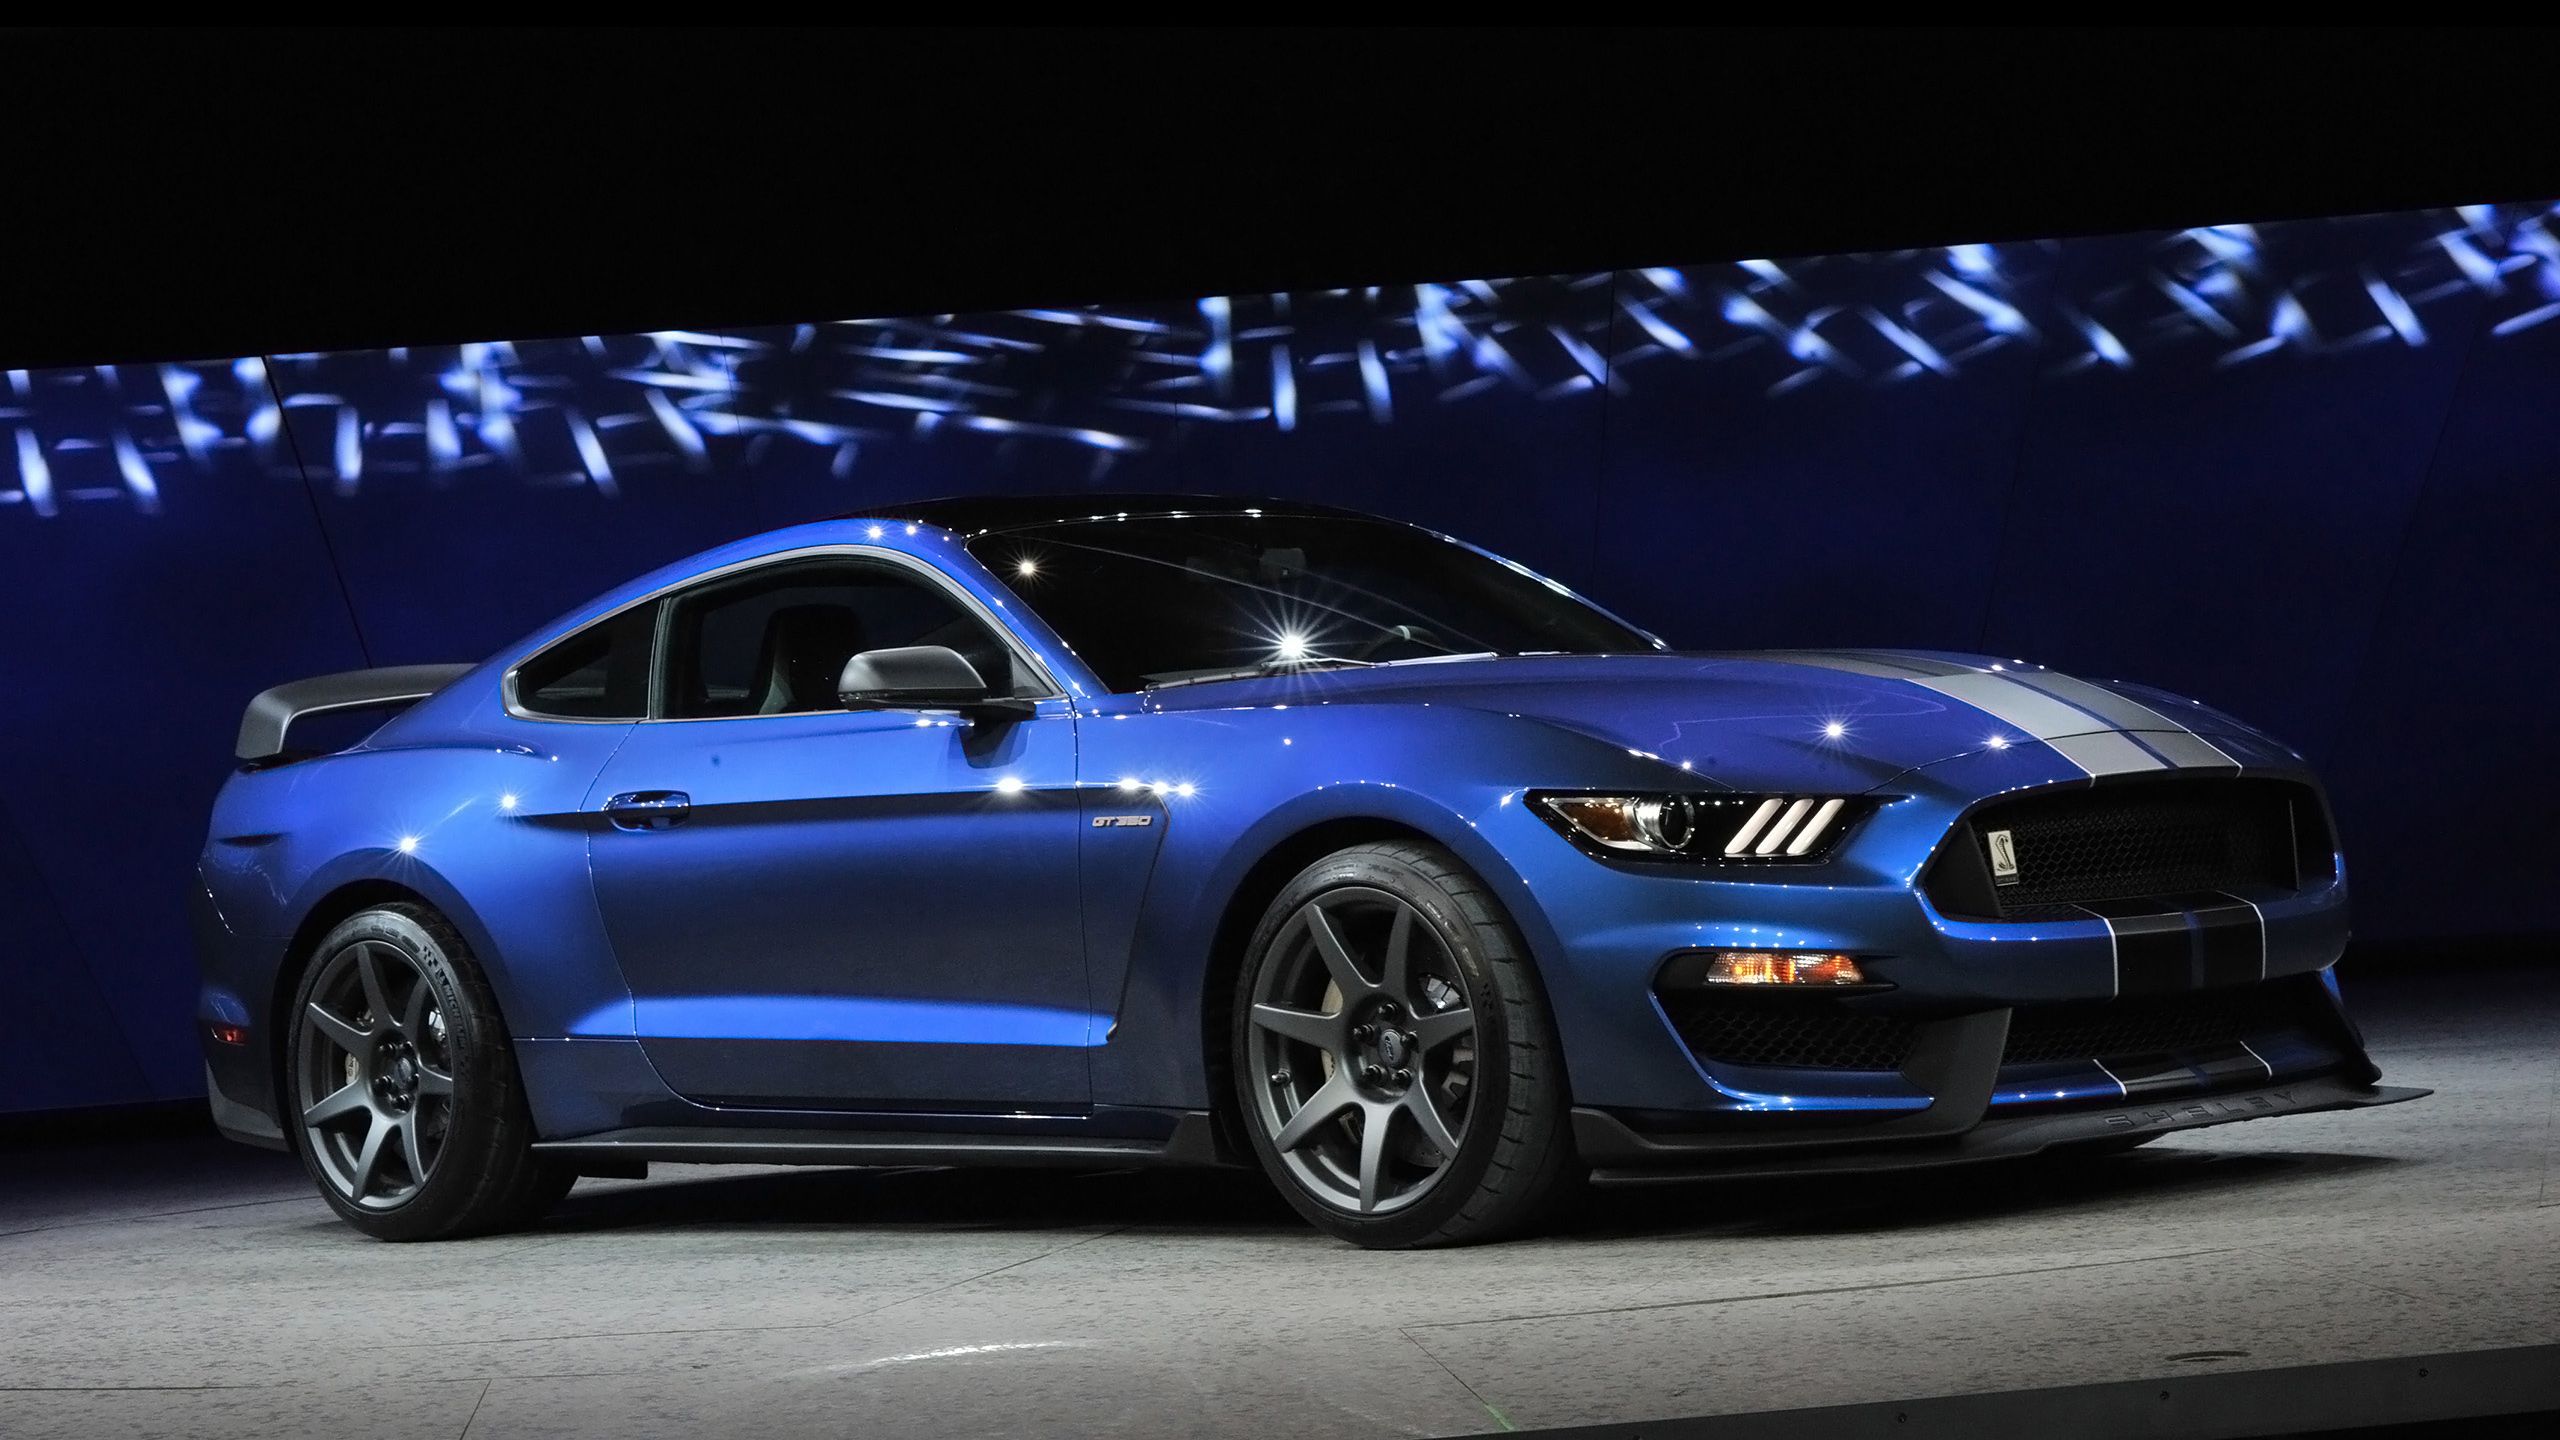 shelby wallpaper,land vehicle,vehicle,car,shelby mustang,automotive design